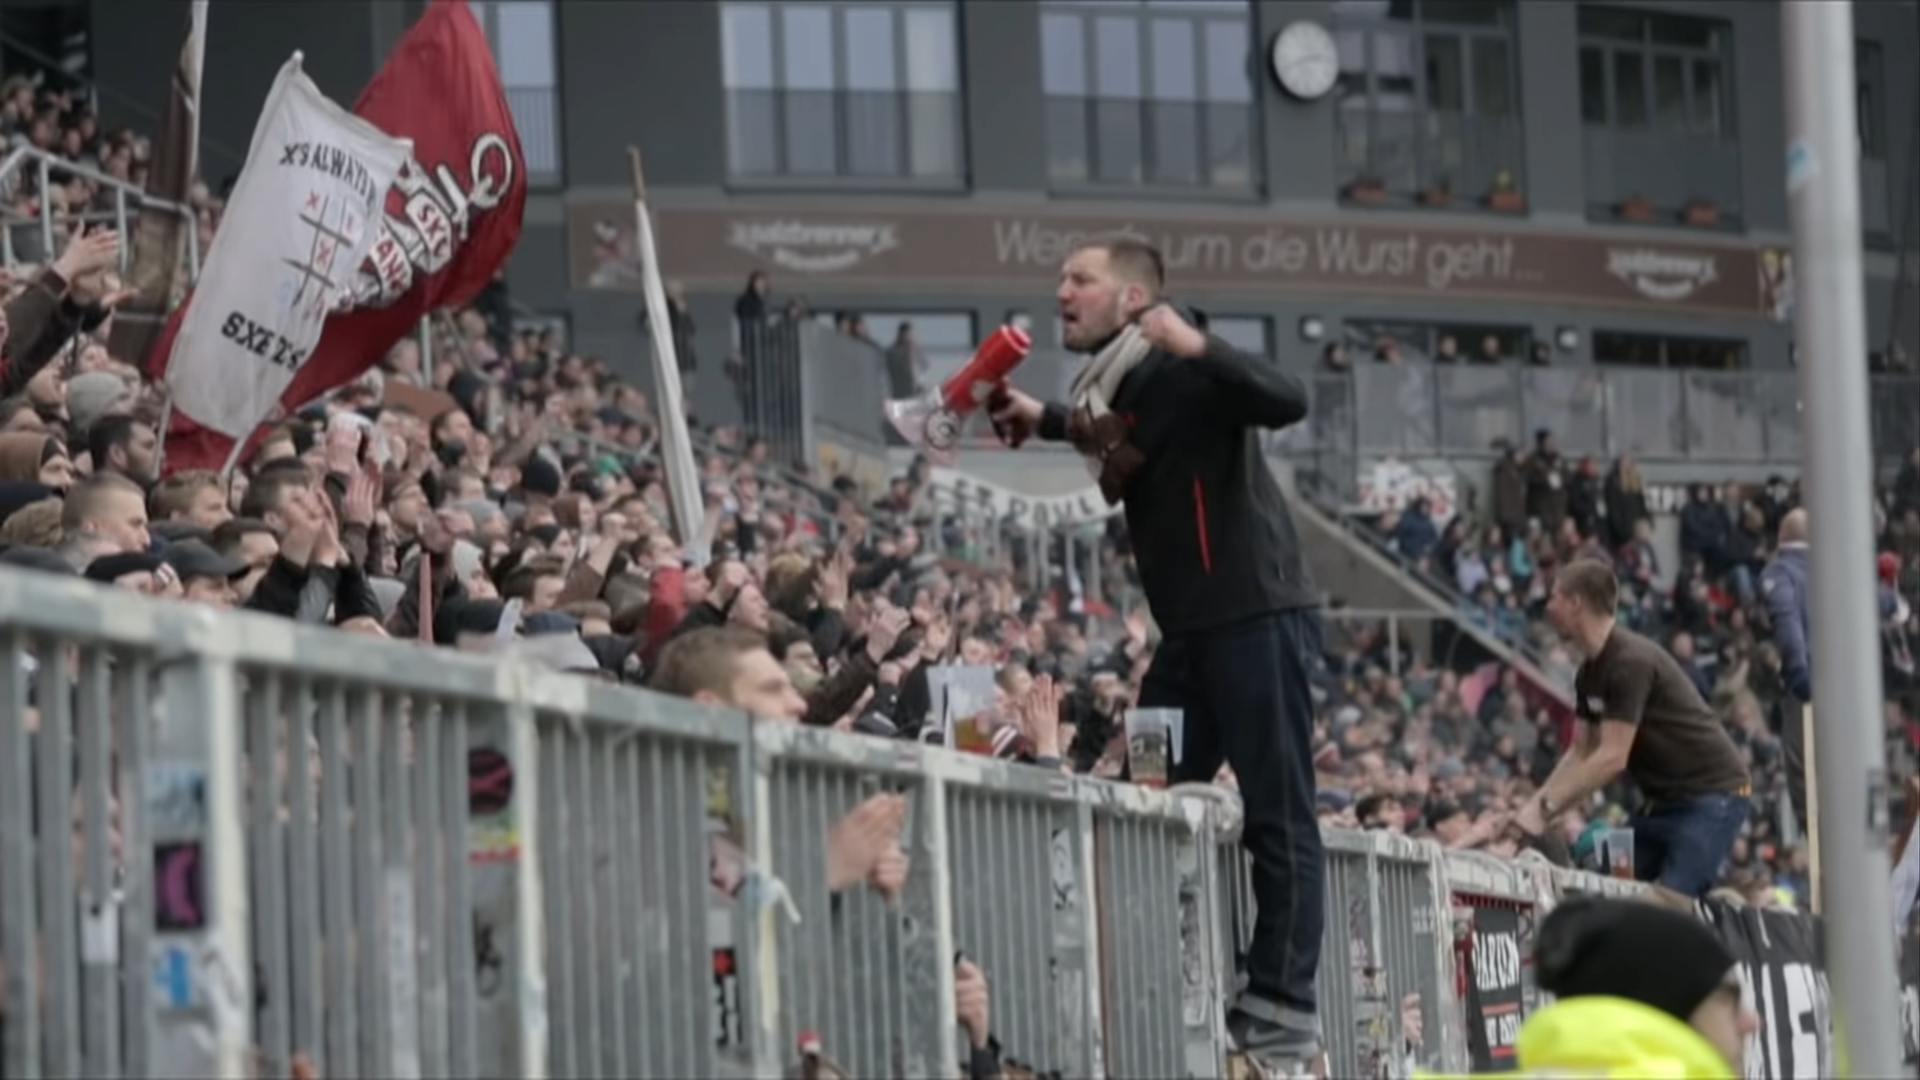 St. Pauli (fonte: canale YouTube "Copa90 Stories")